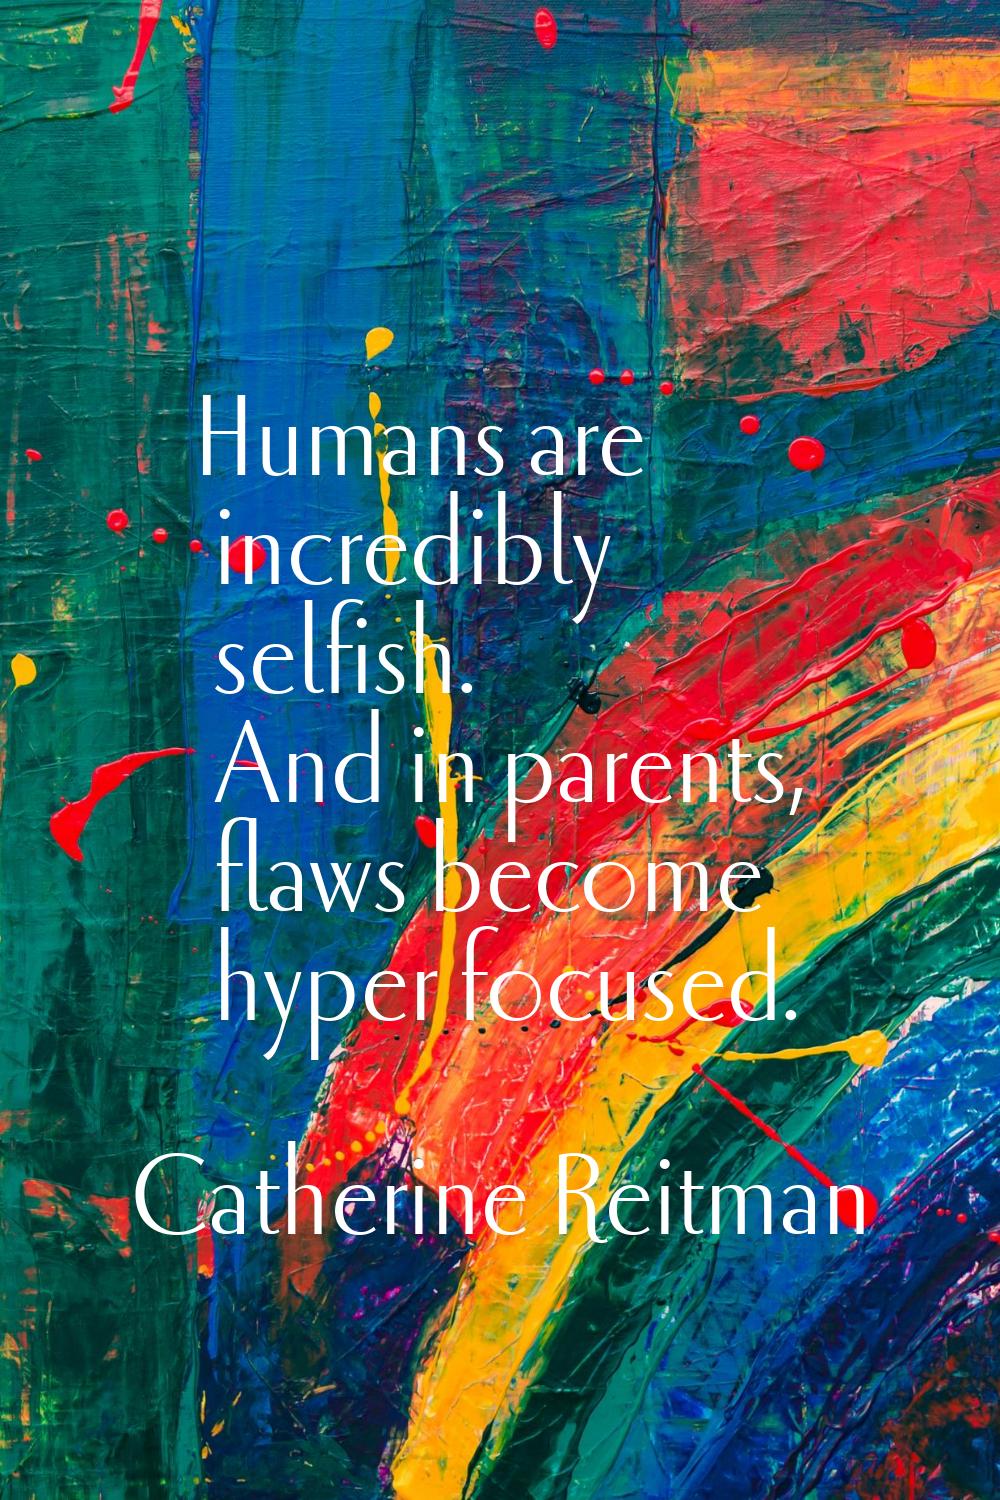 Humans are incredibly selfish. And in parents, flaws become hyper focused.